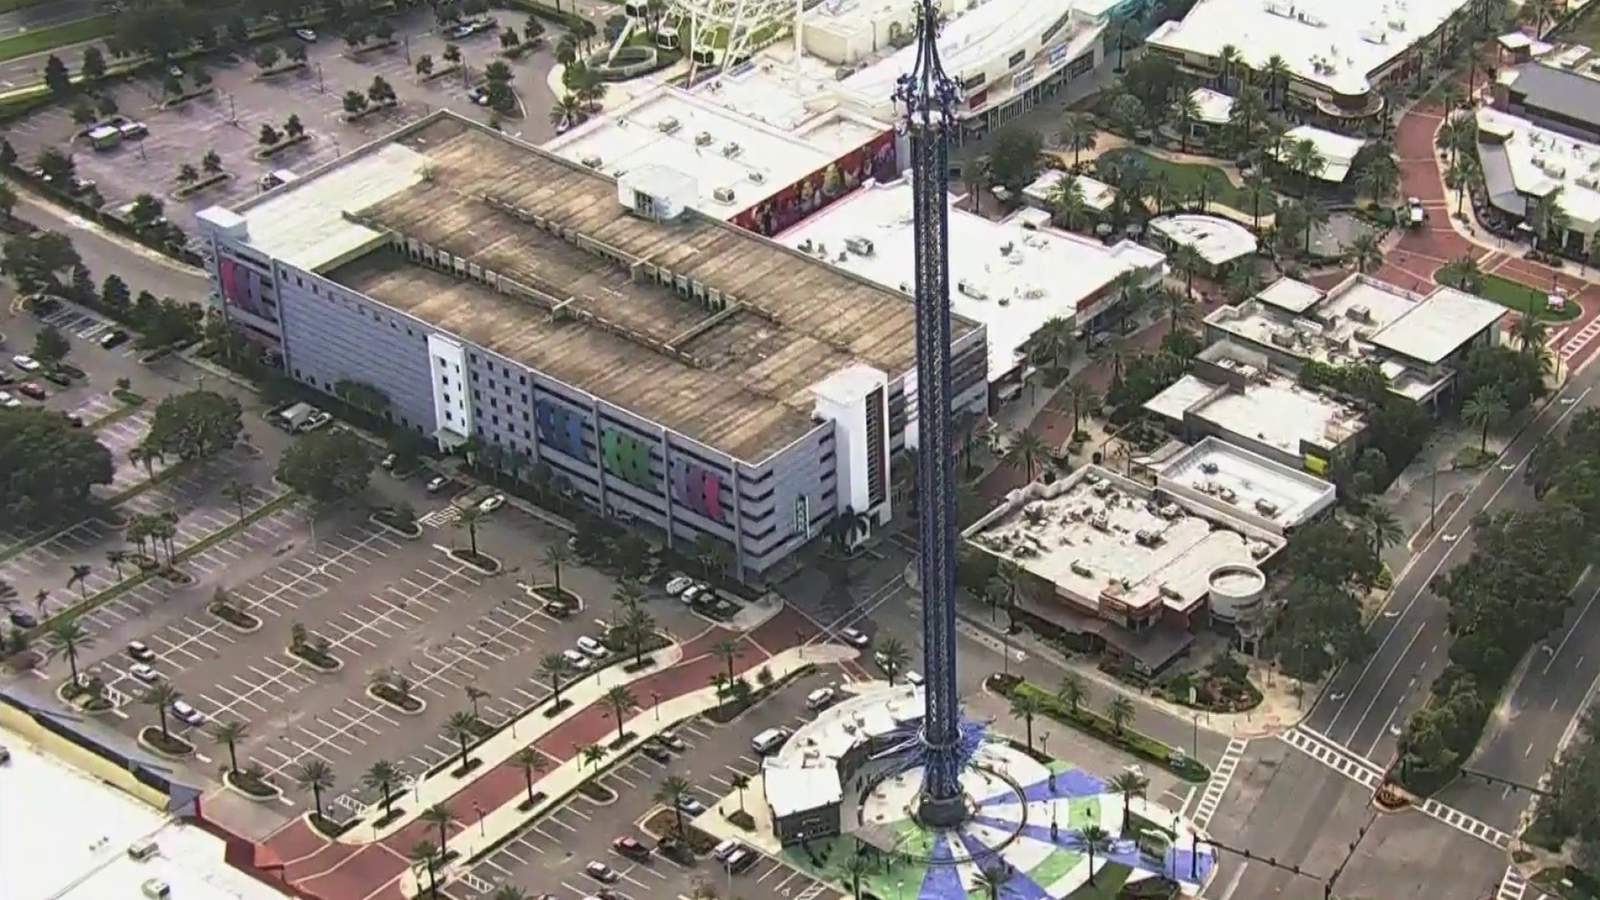 Worker falls to his death from StarFlyer attraction in Orlando